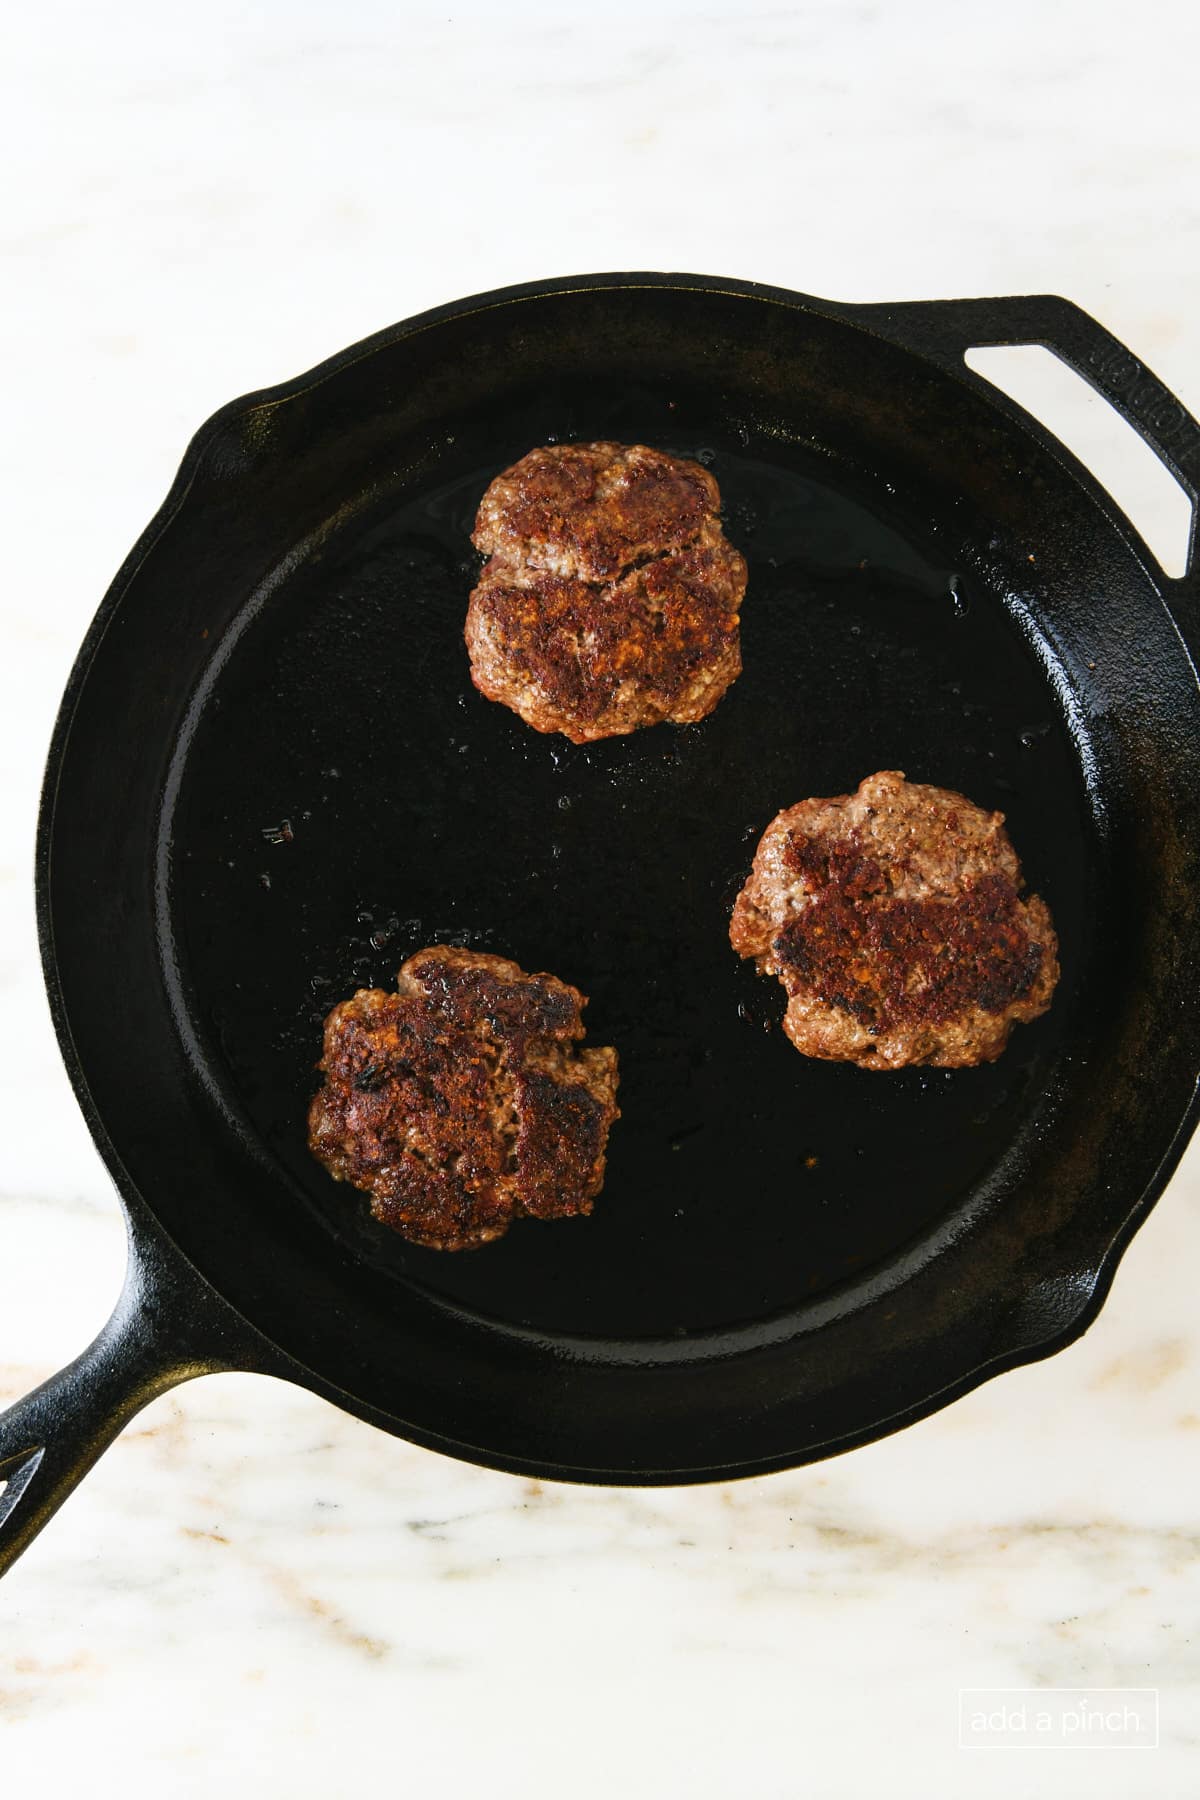 Cooked hamburger patties in a cast iron skillet.